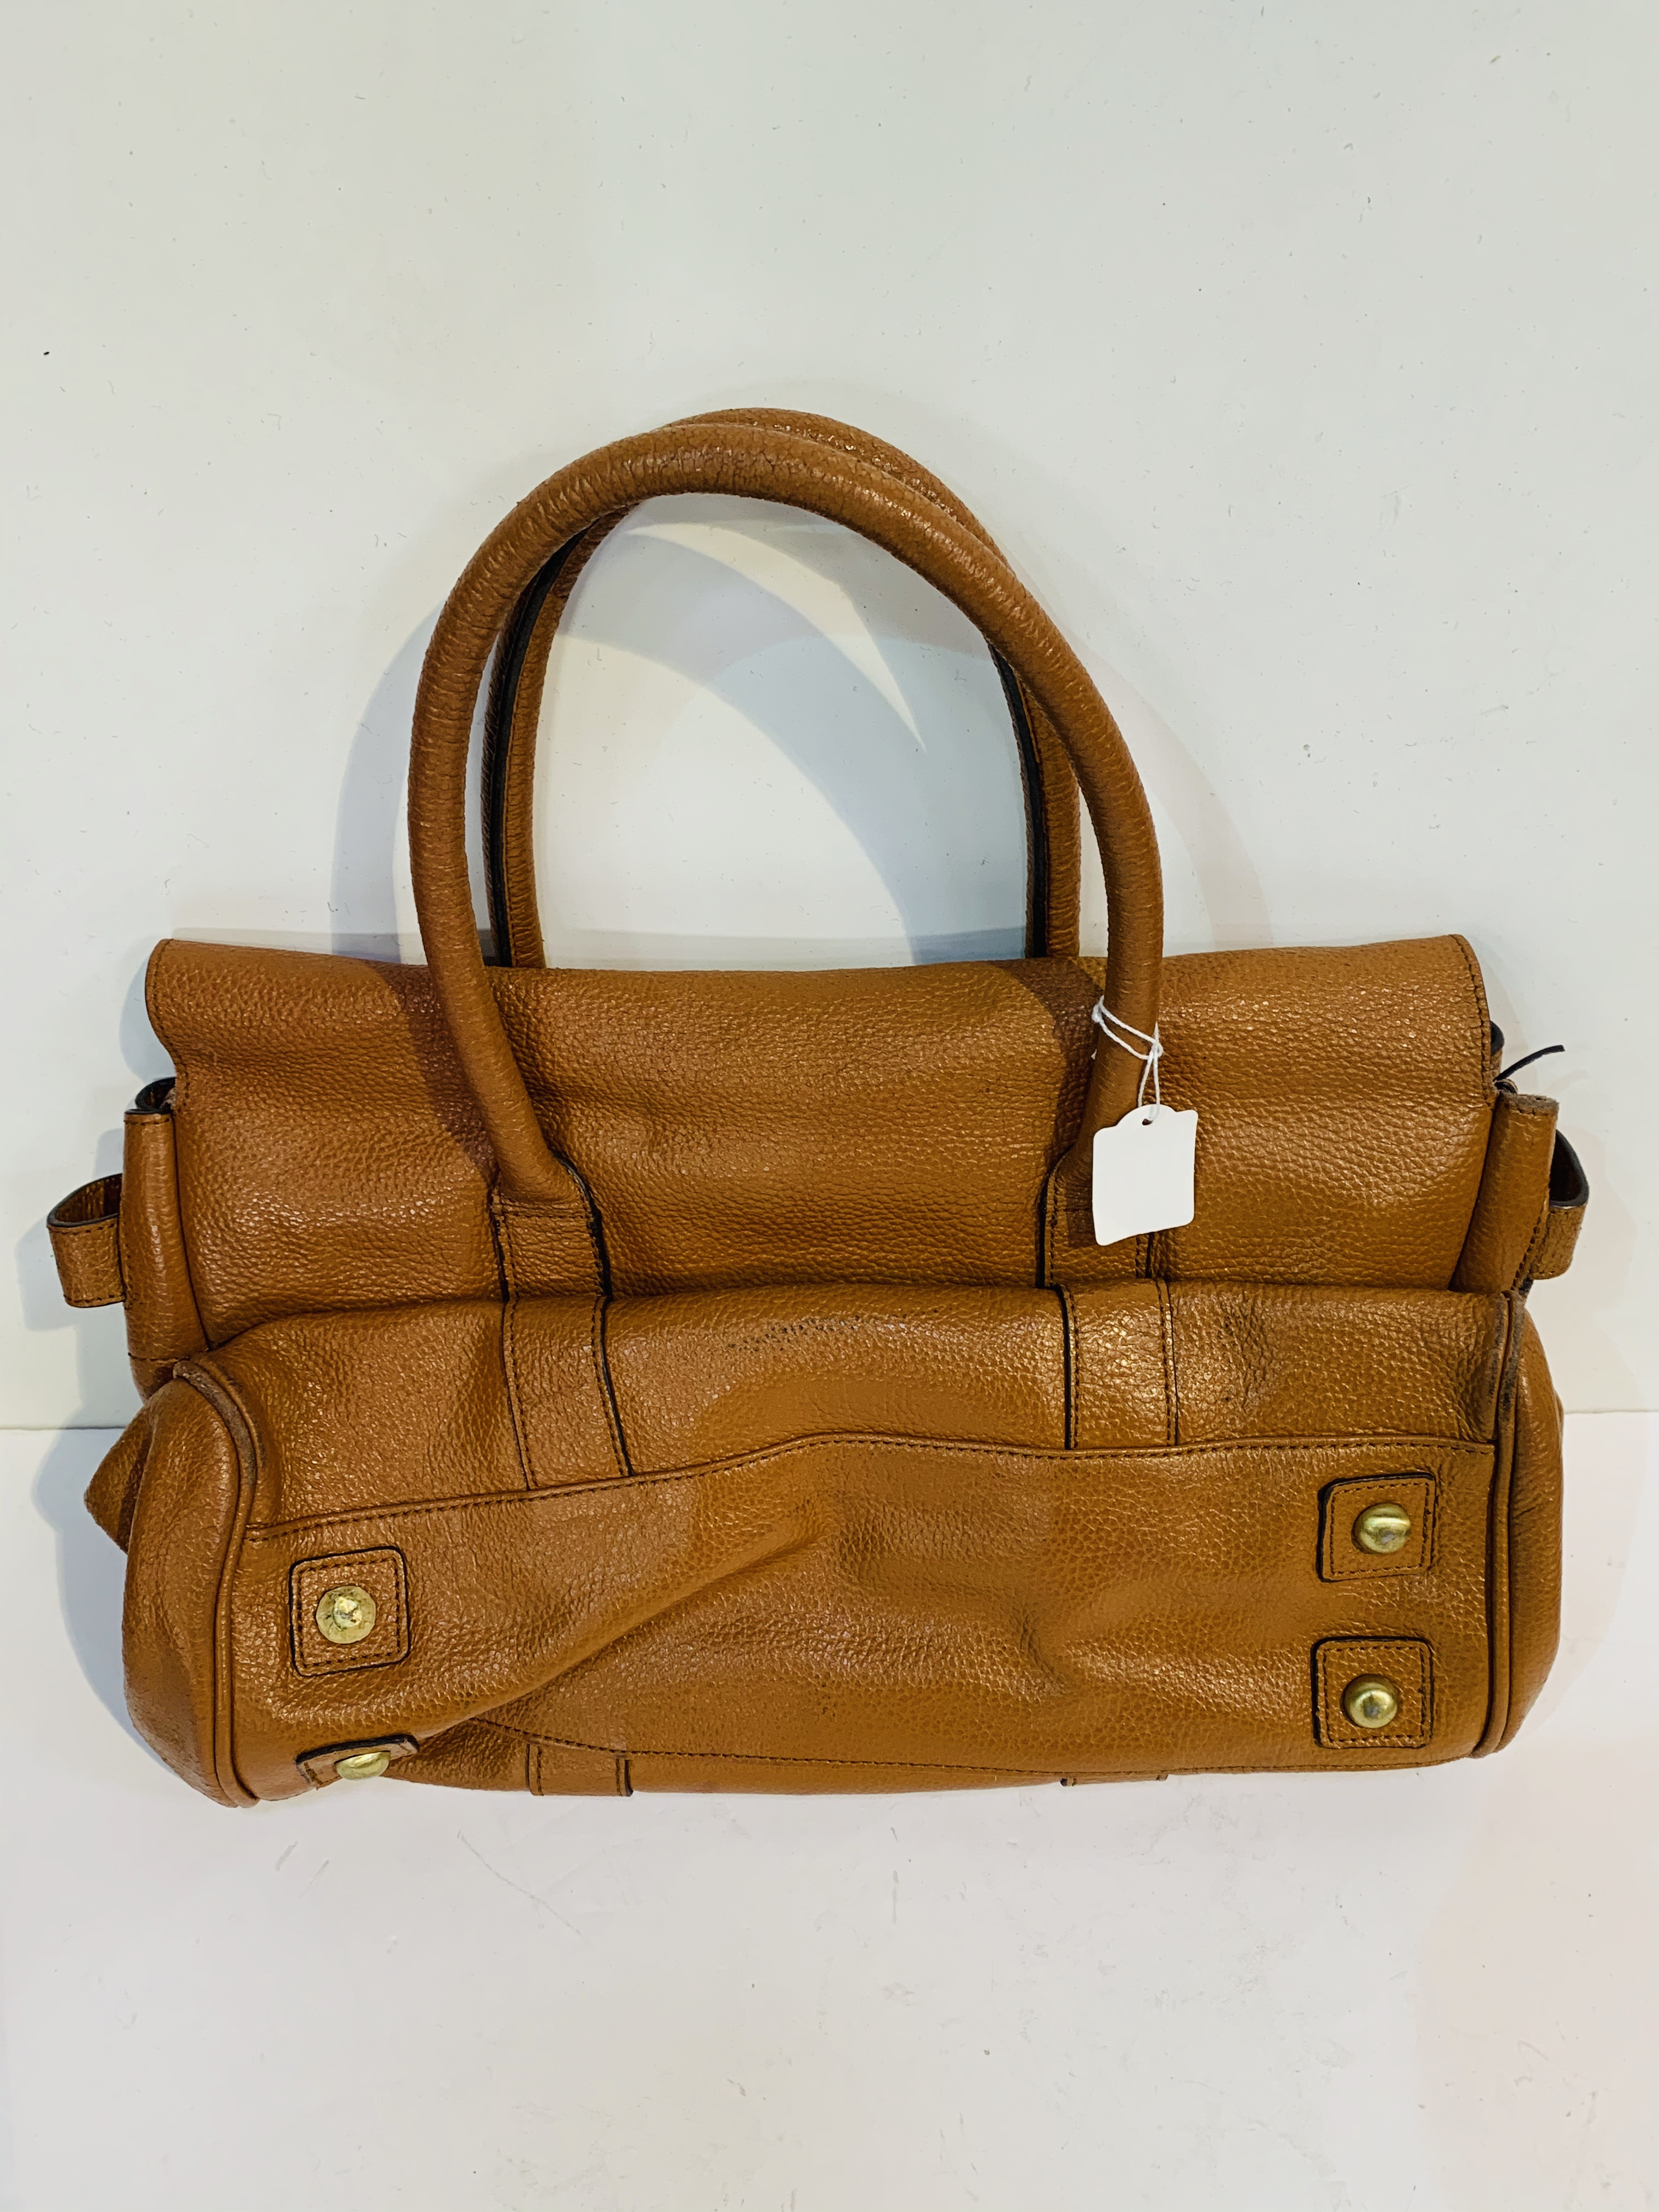 Mulberry style tan calfskin handbag, with code 373140. - Image 2 of 2